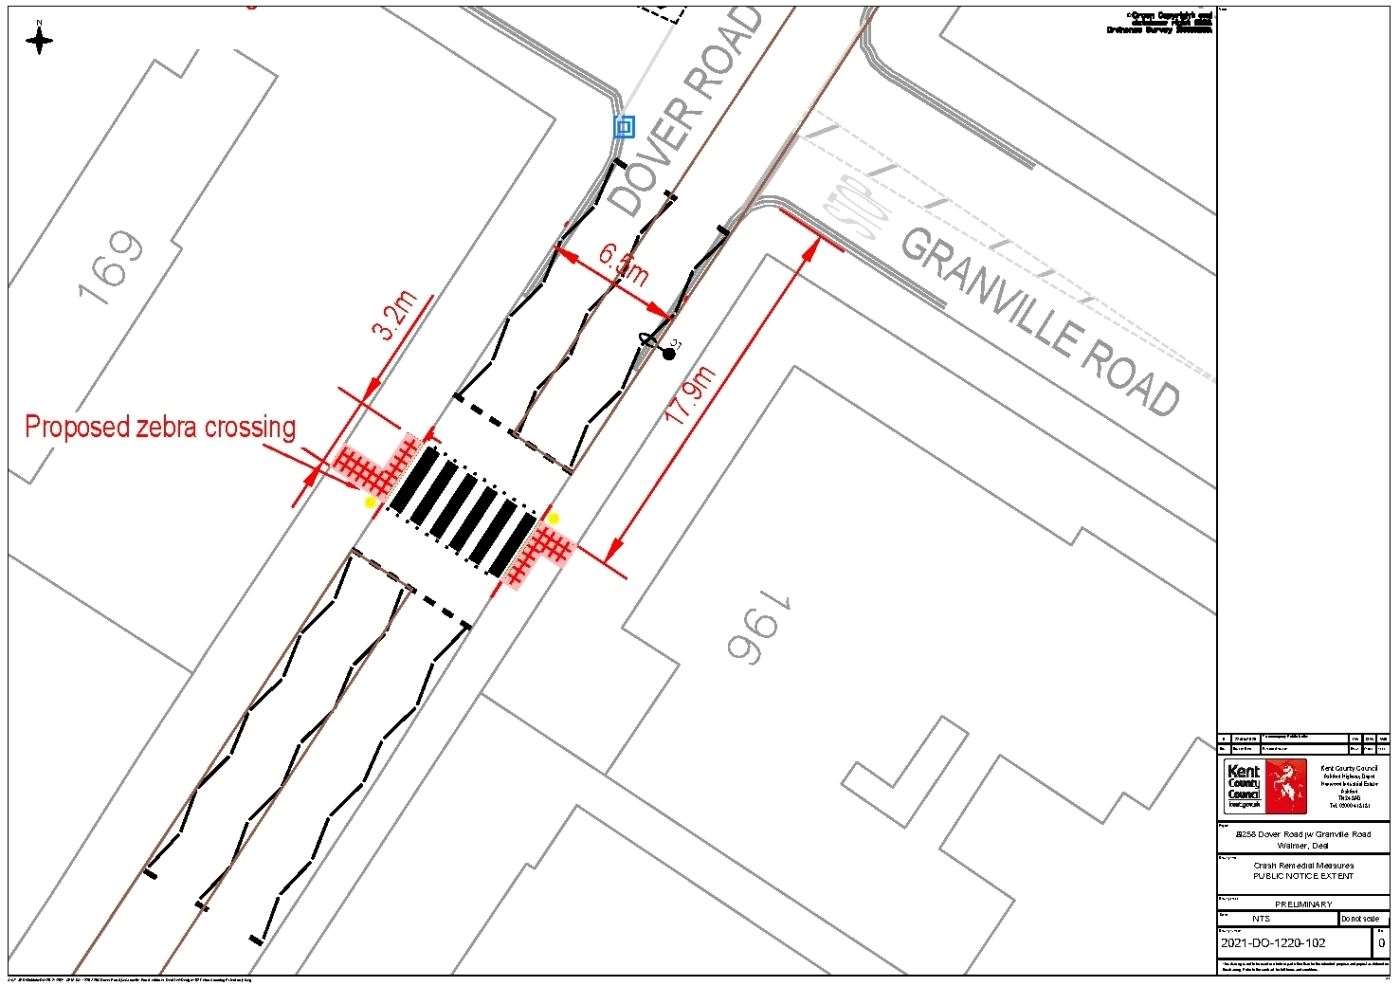 The location of the proposed zebra crossing on a drawing by Kent County Council